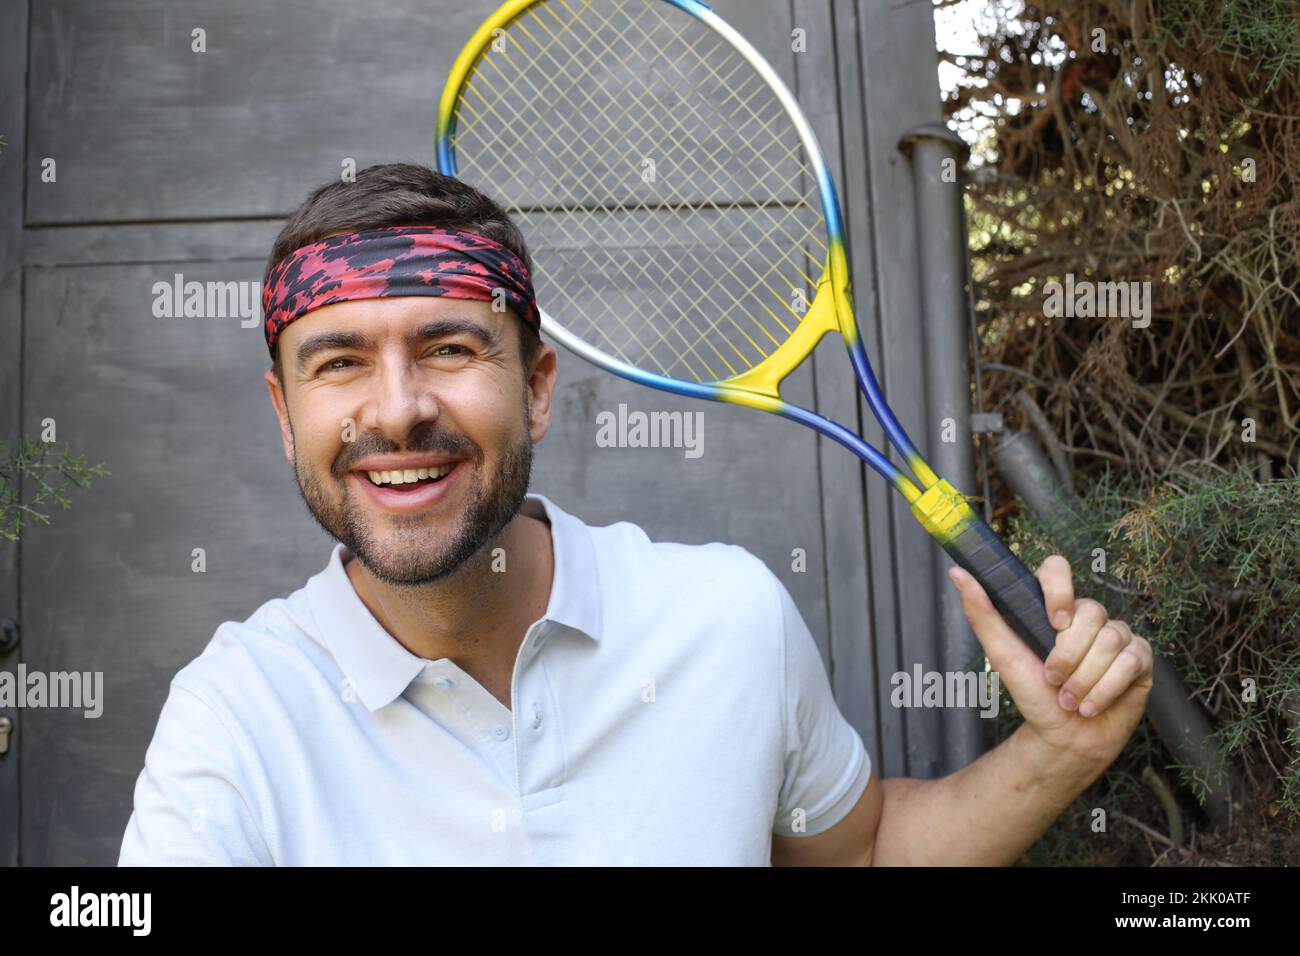 Tennis player with headband and polo shirt portrait Stock Photo